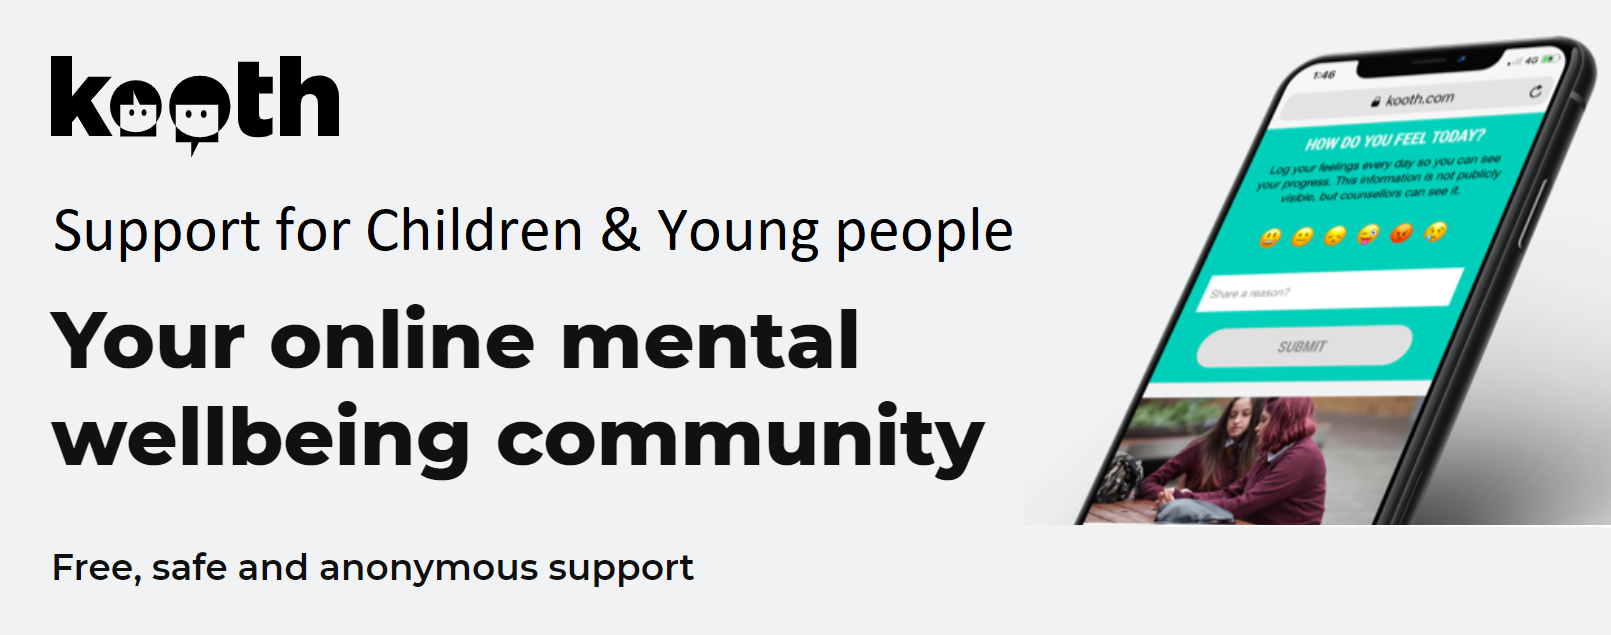 Online support for Children and young people